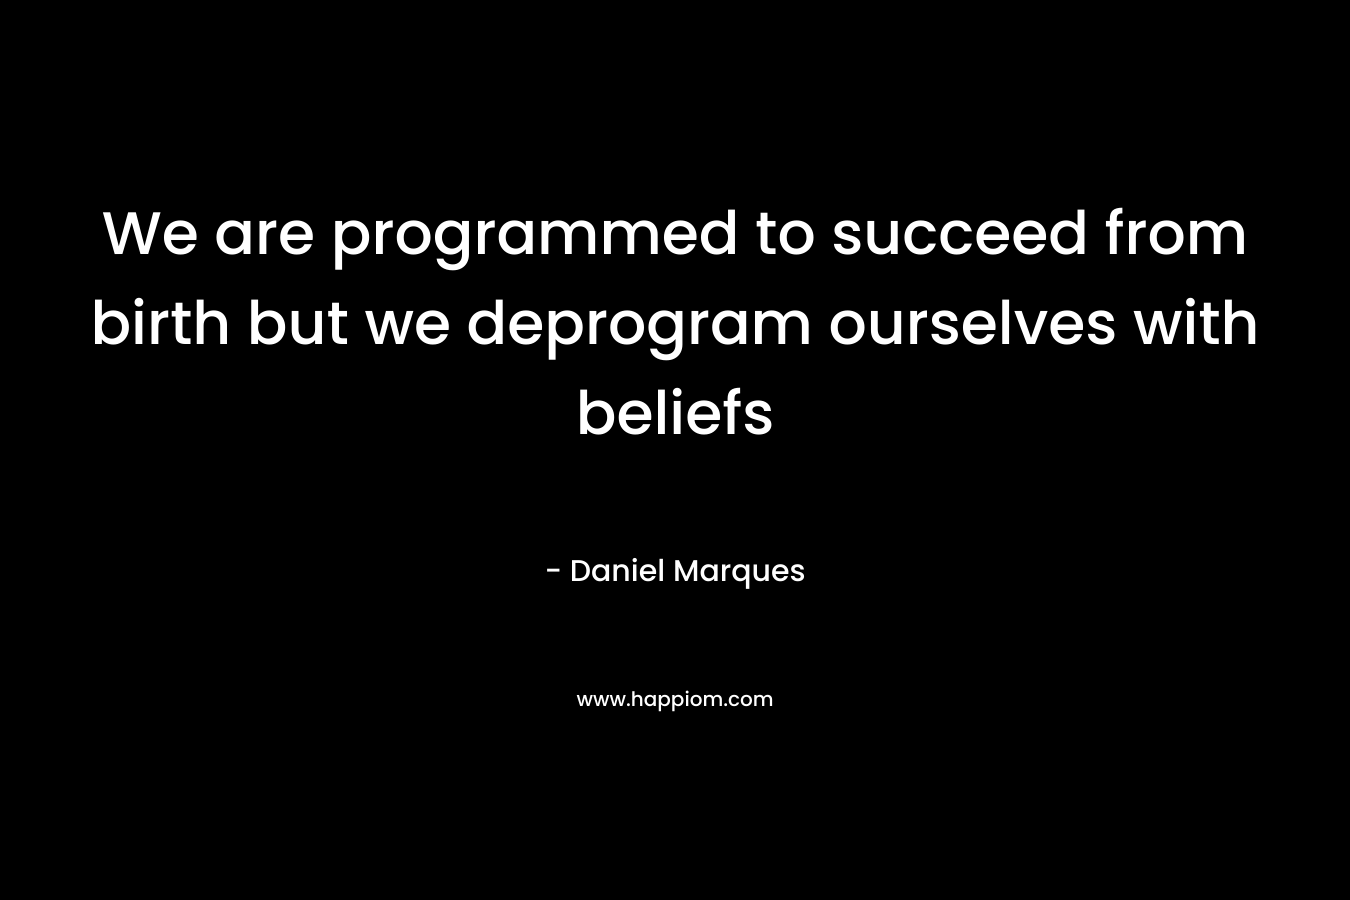 We are programmed to succeed from birth but we deprogram ourselves with beliefs